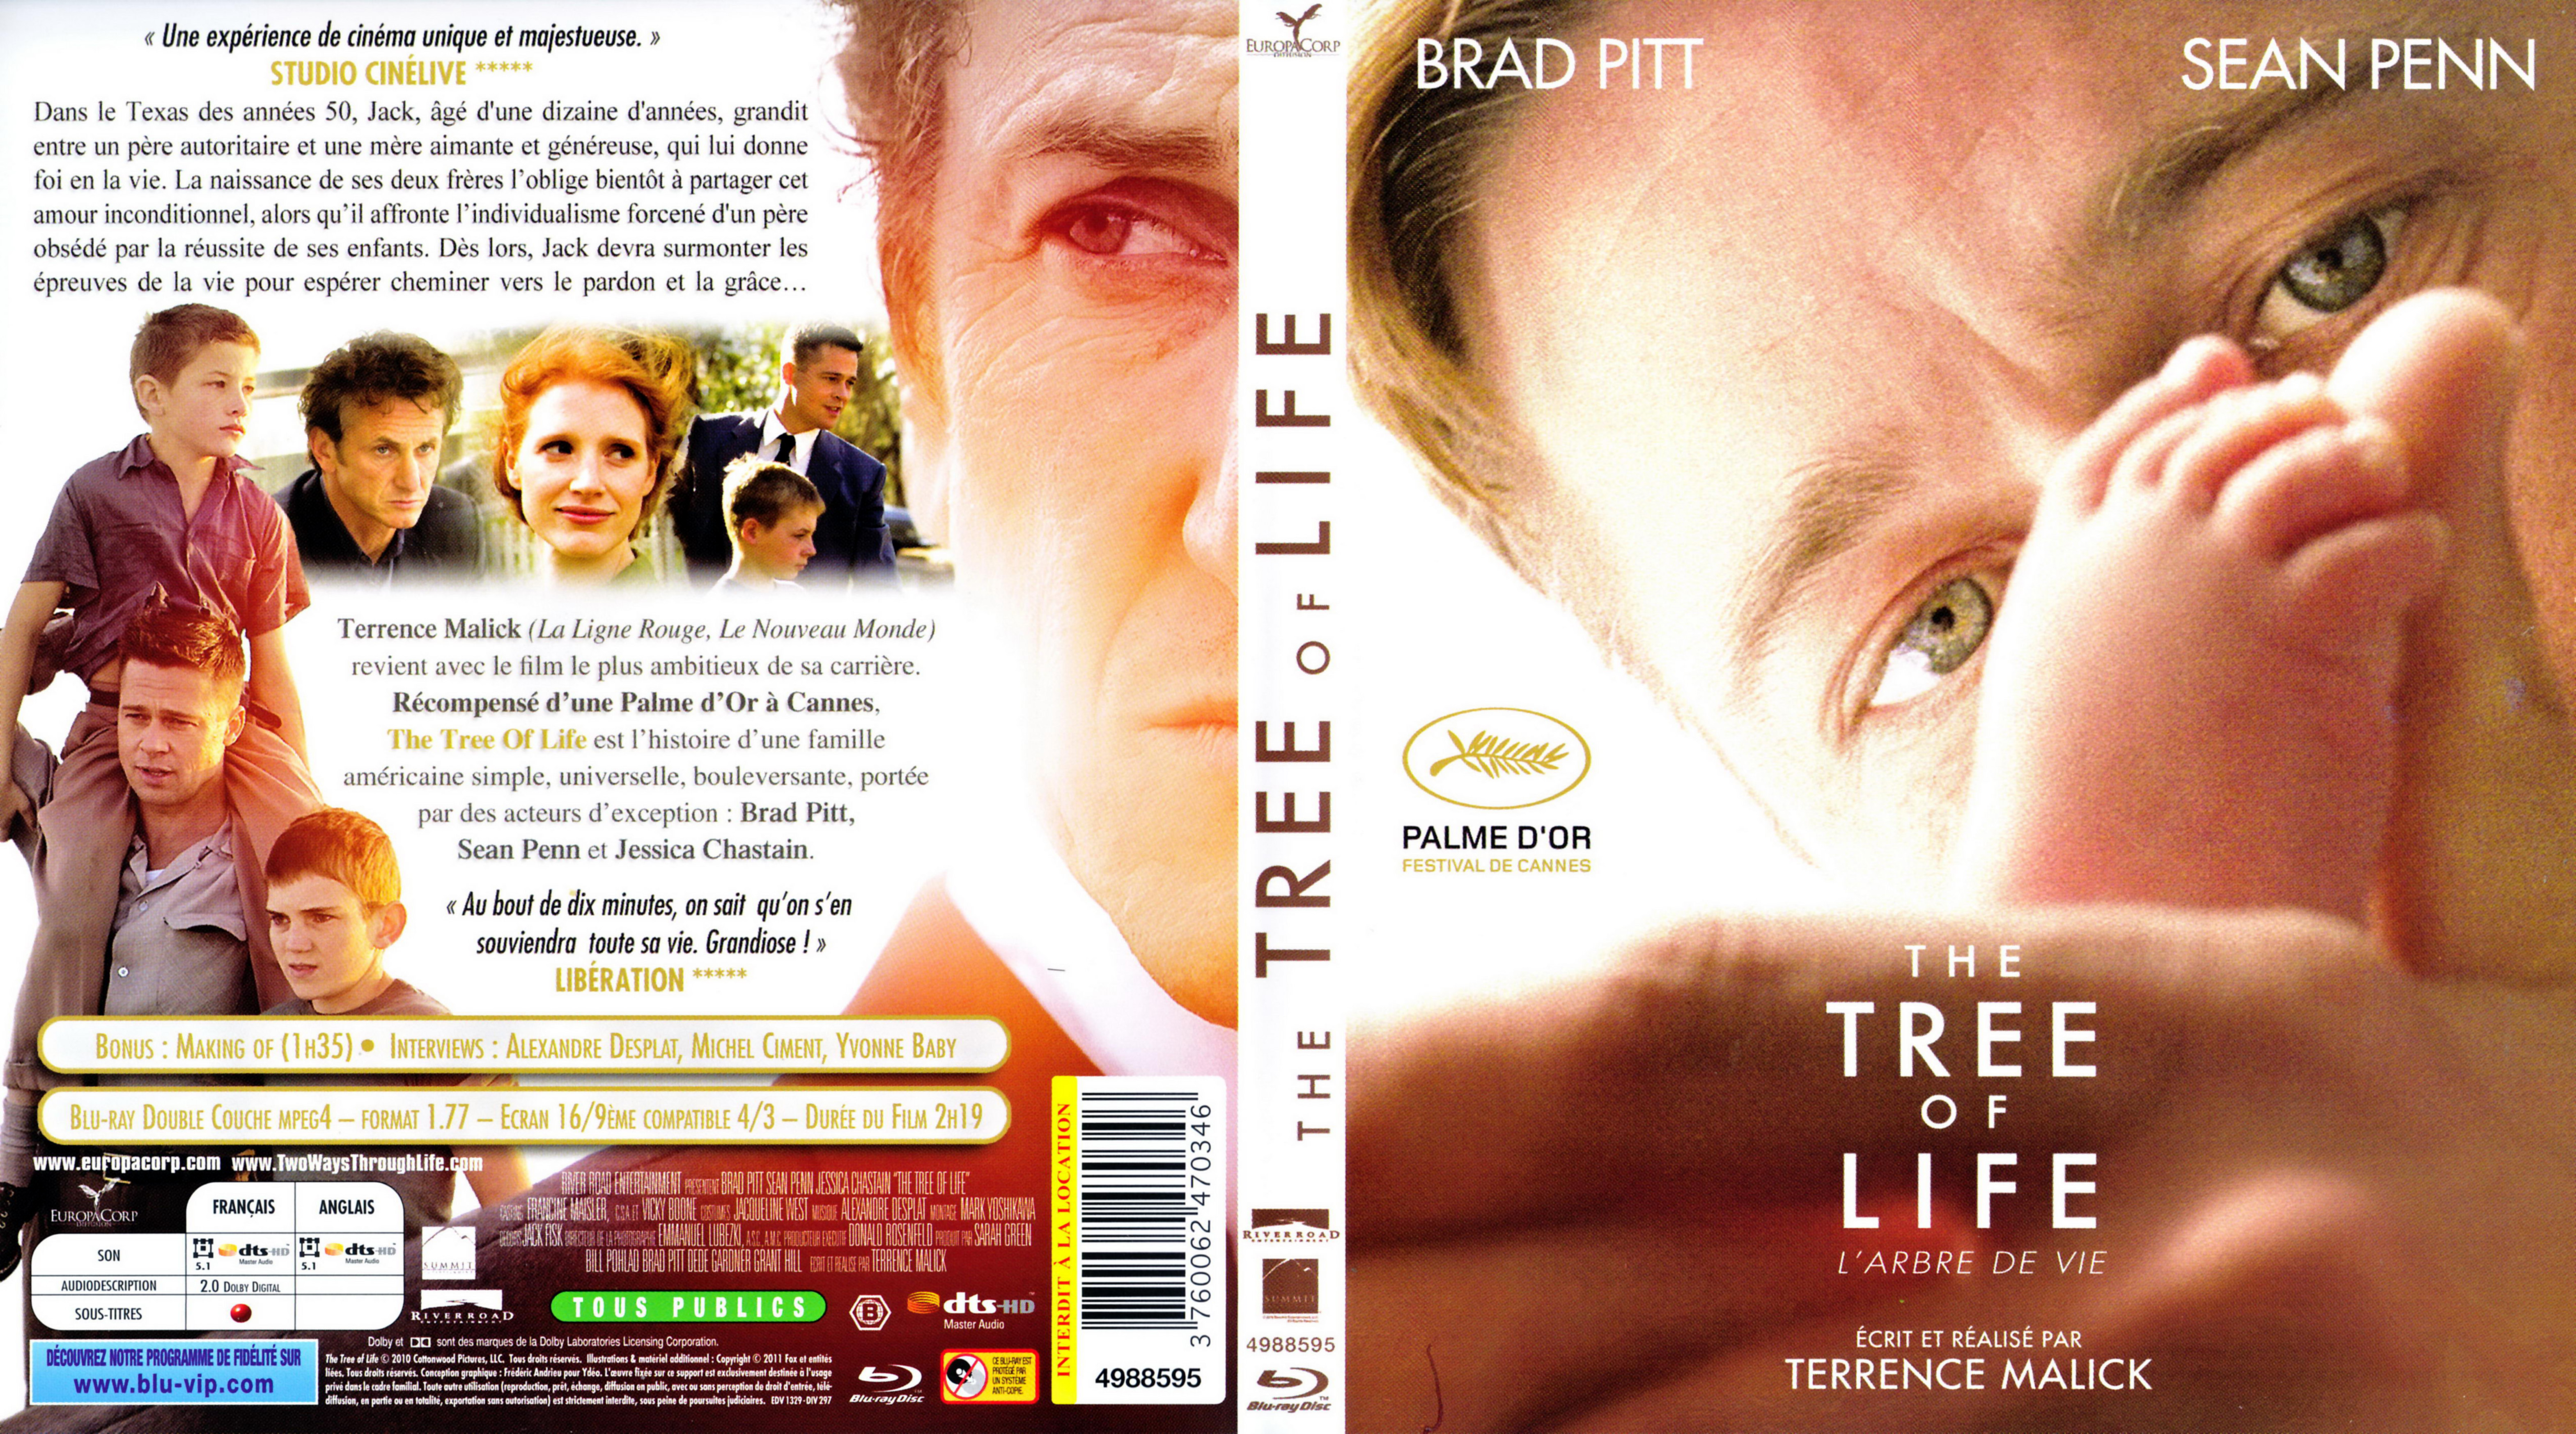 Jaquette DVD The tree of life (BLU-RAY)